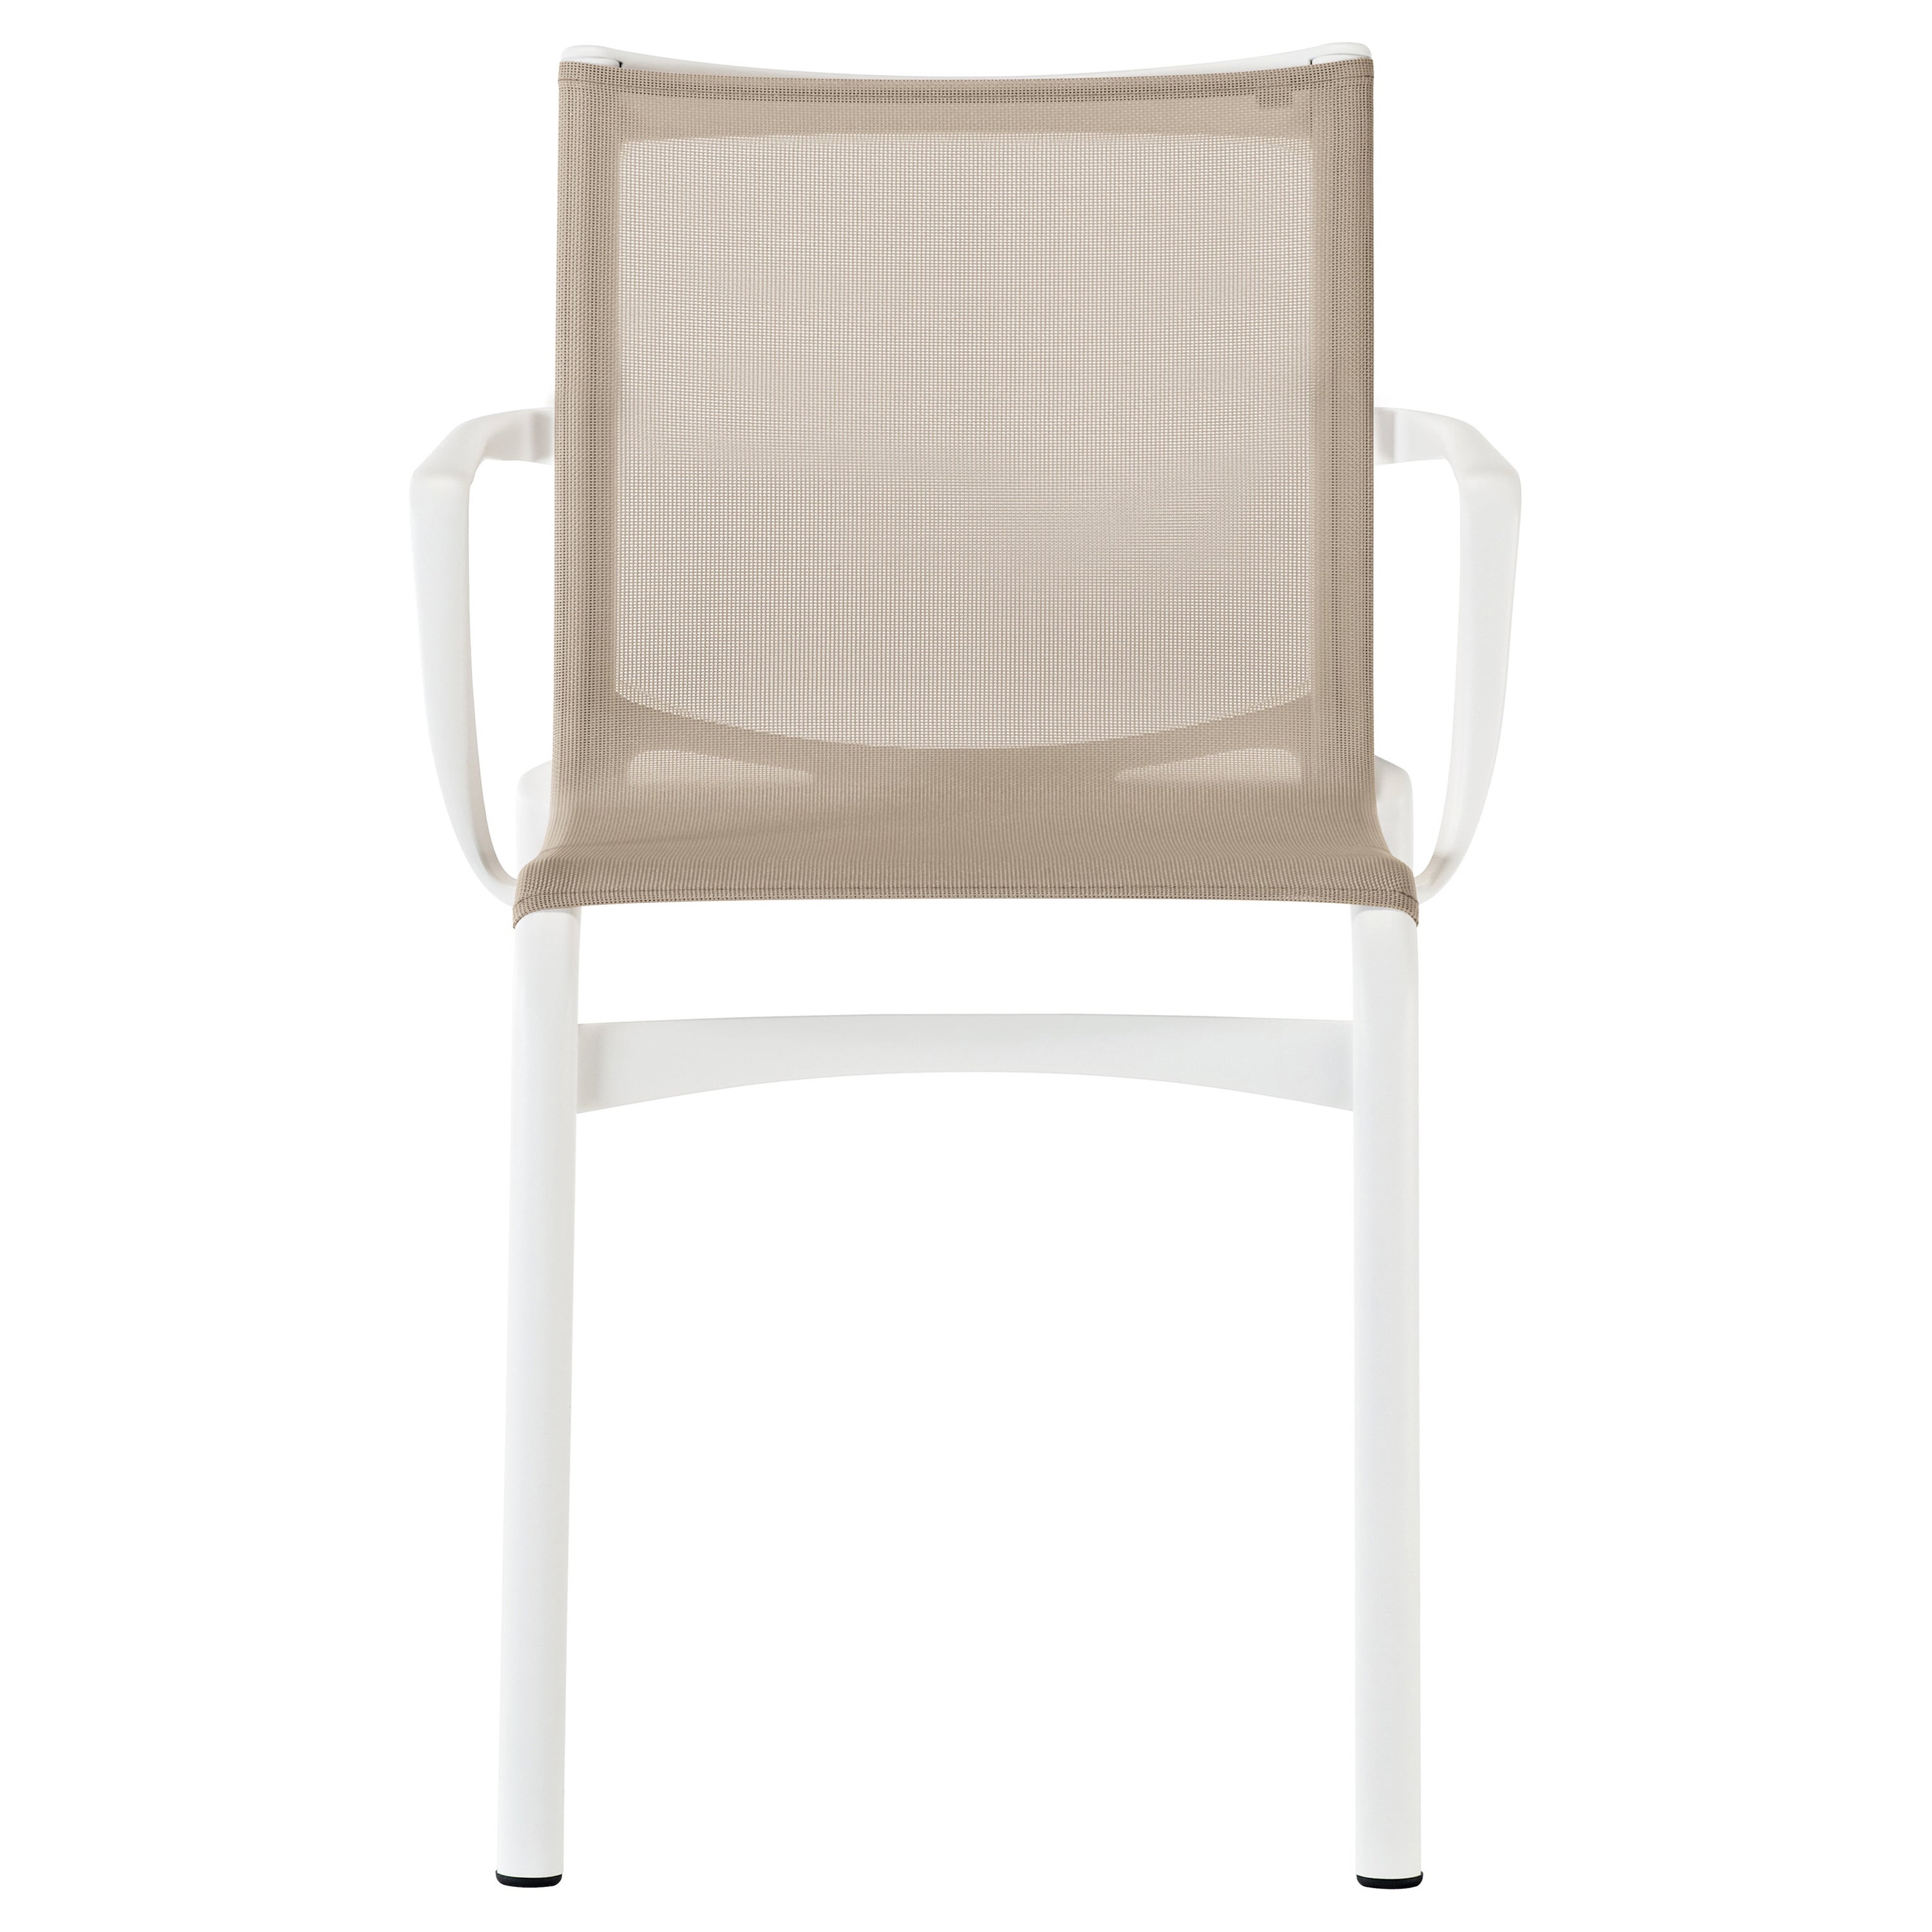 Alias Bigframe 44 Armchair in Sand Mesh with White Lacquered Aluminium Frame For Sale